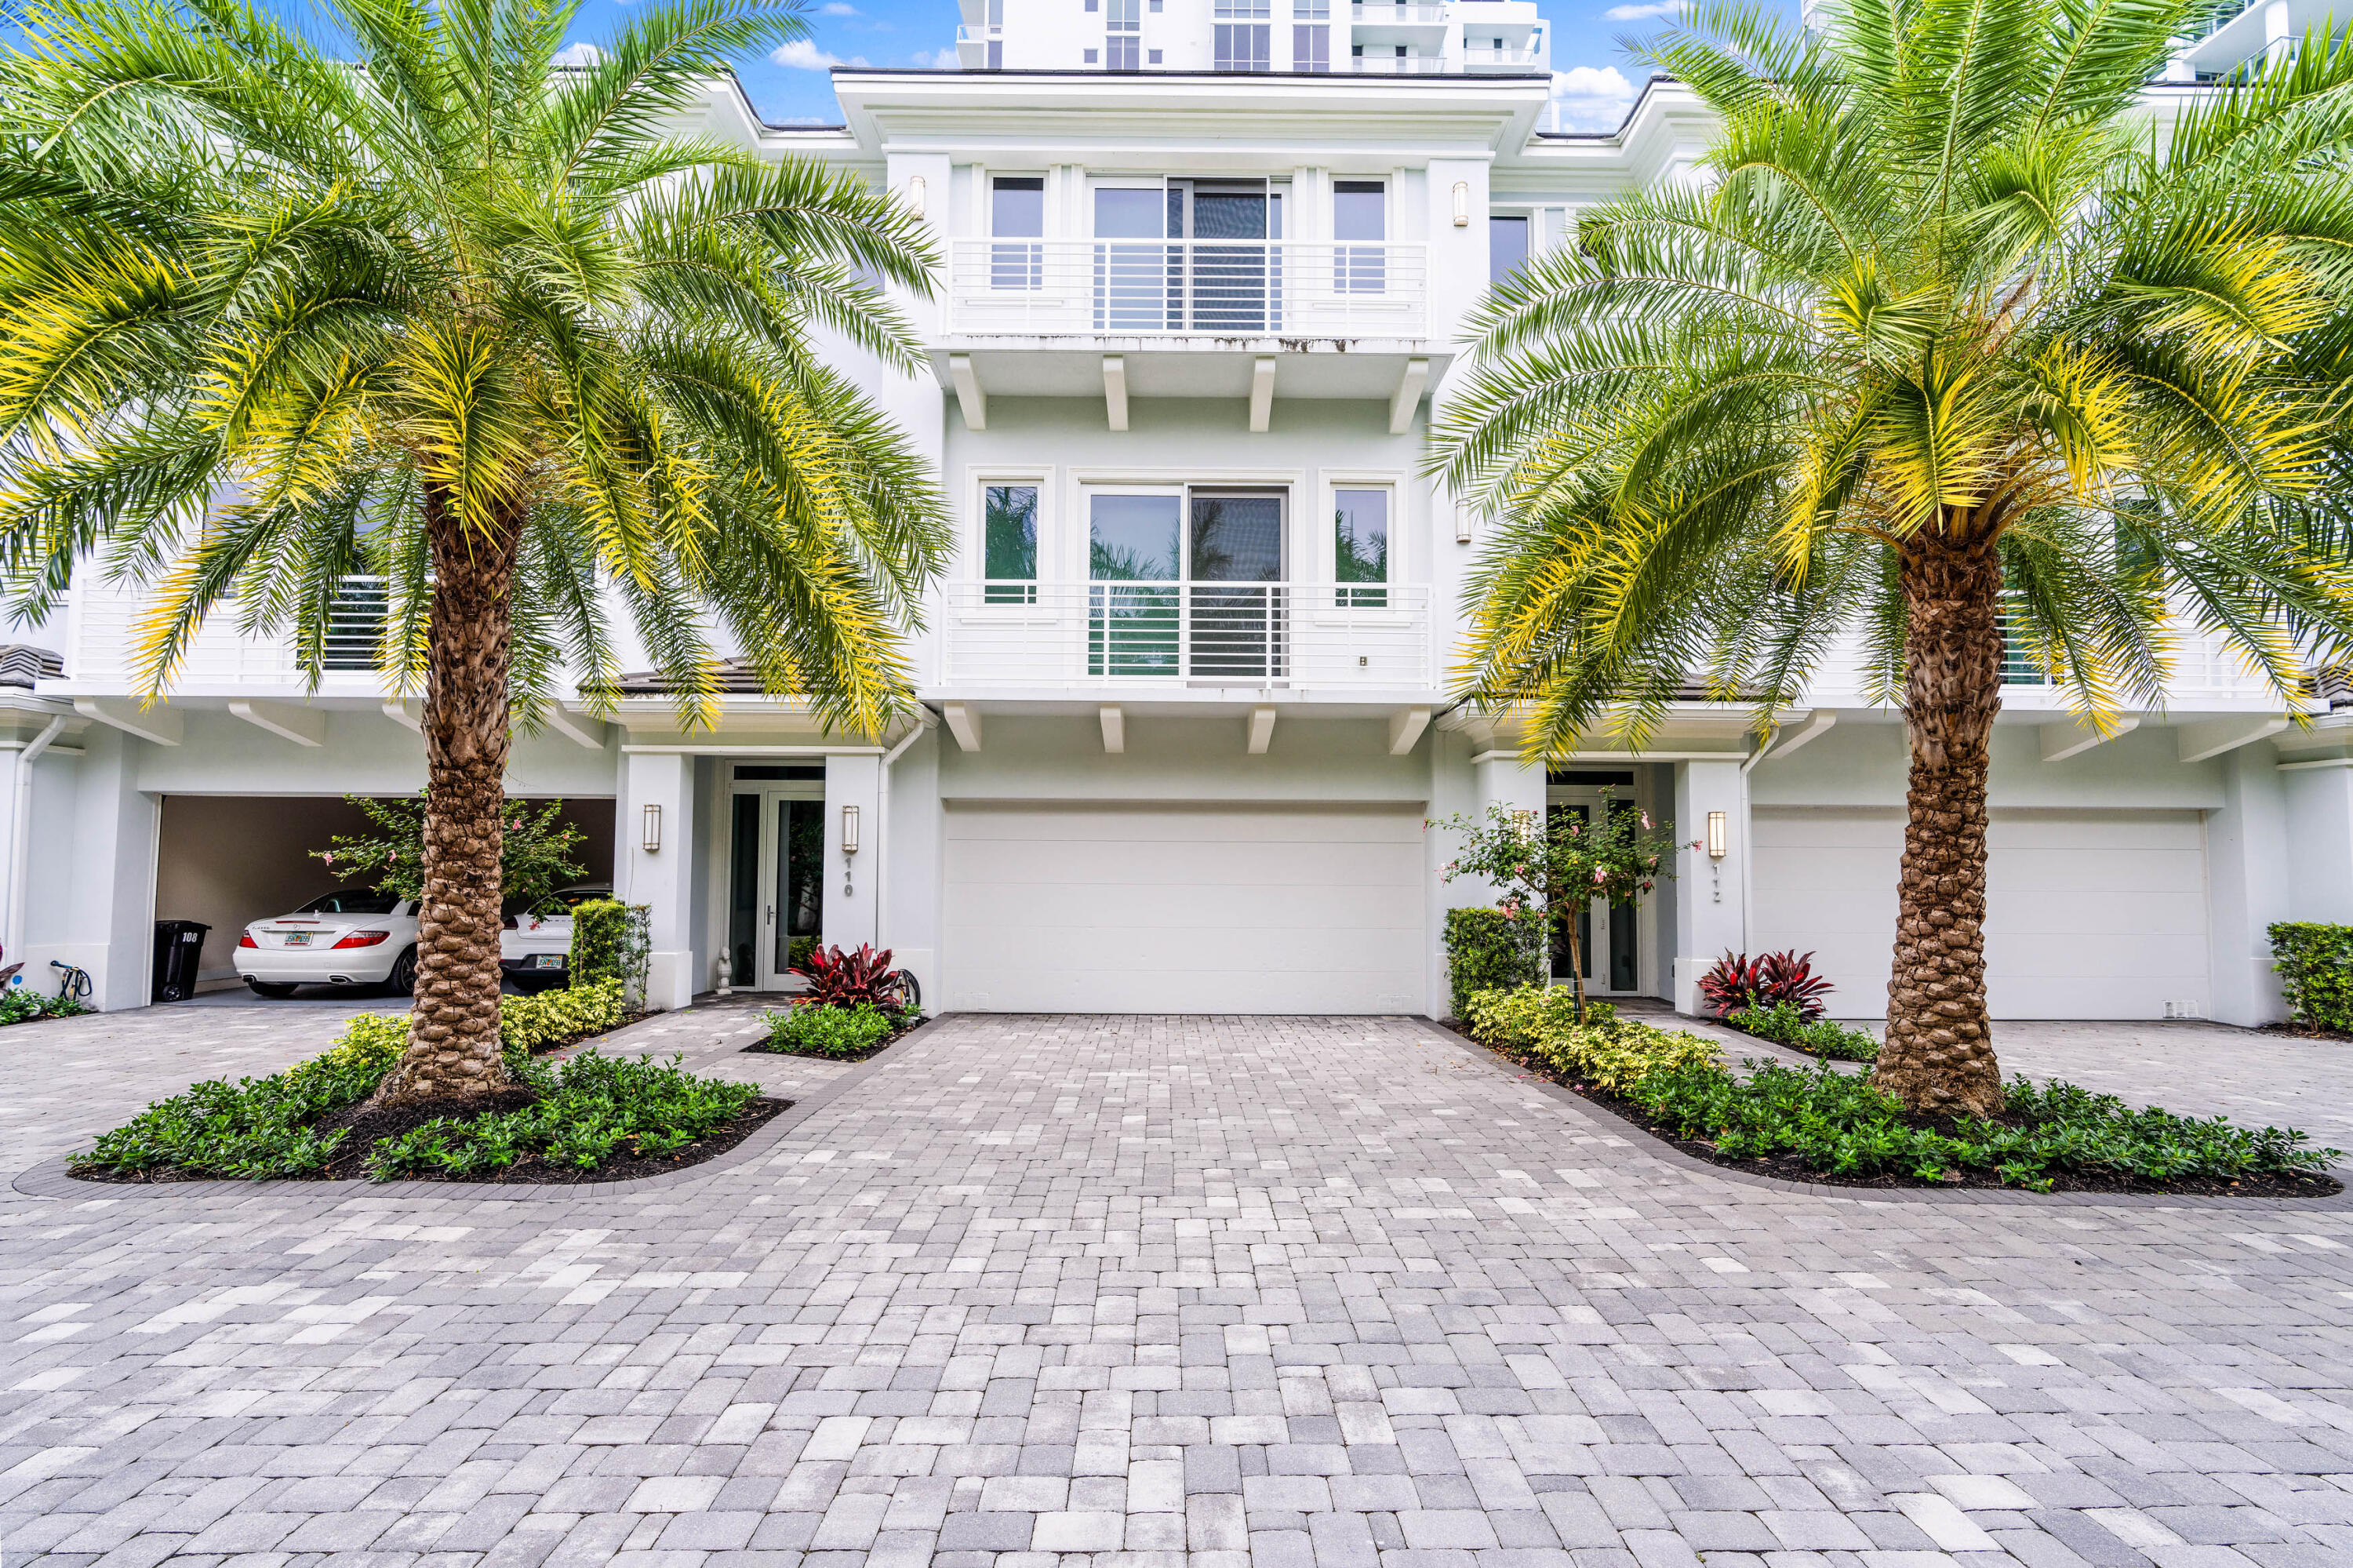 110 Water Club Court, North Palm Beach, Miami-Dade County, Florida - 3 Bedrooms  
4 Bathrooms - 